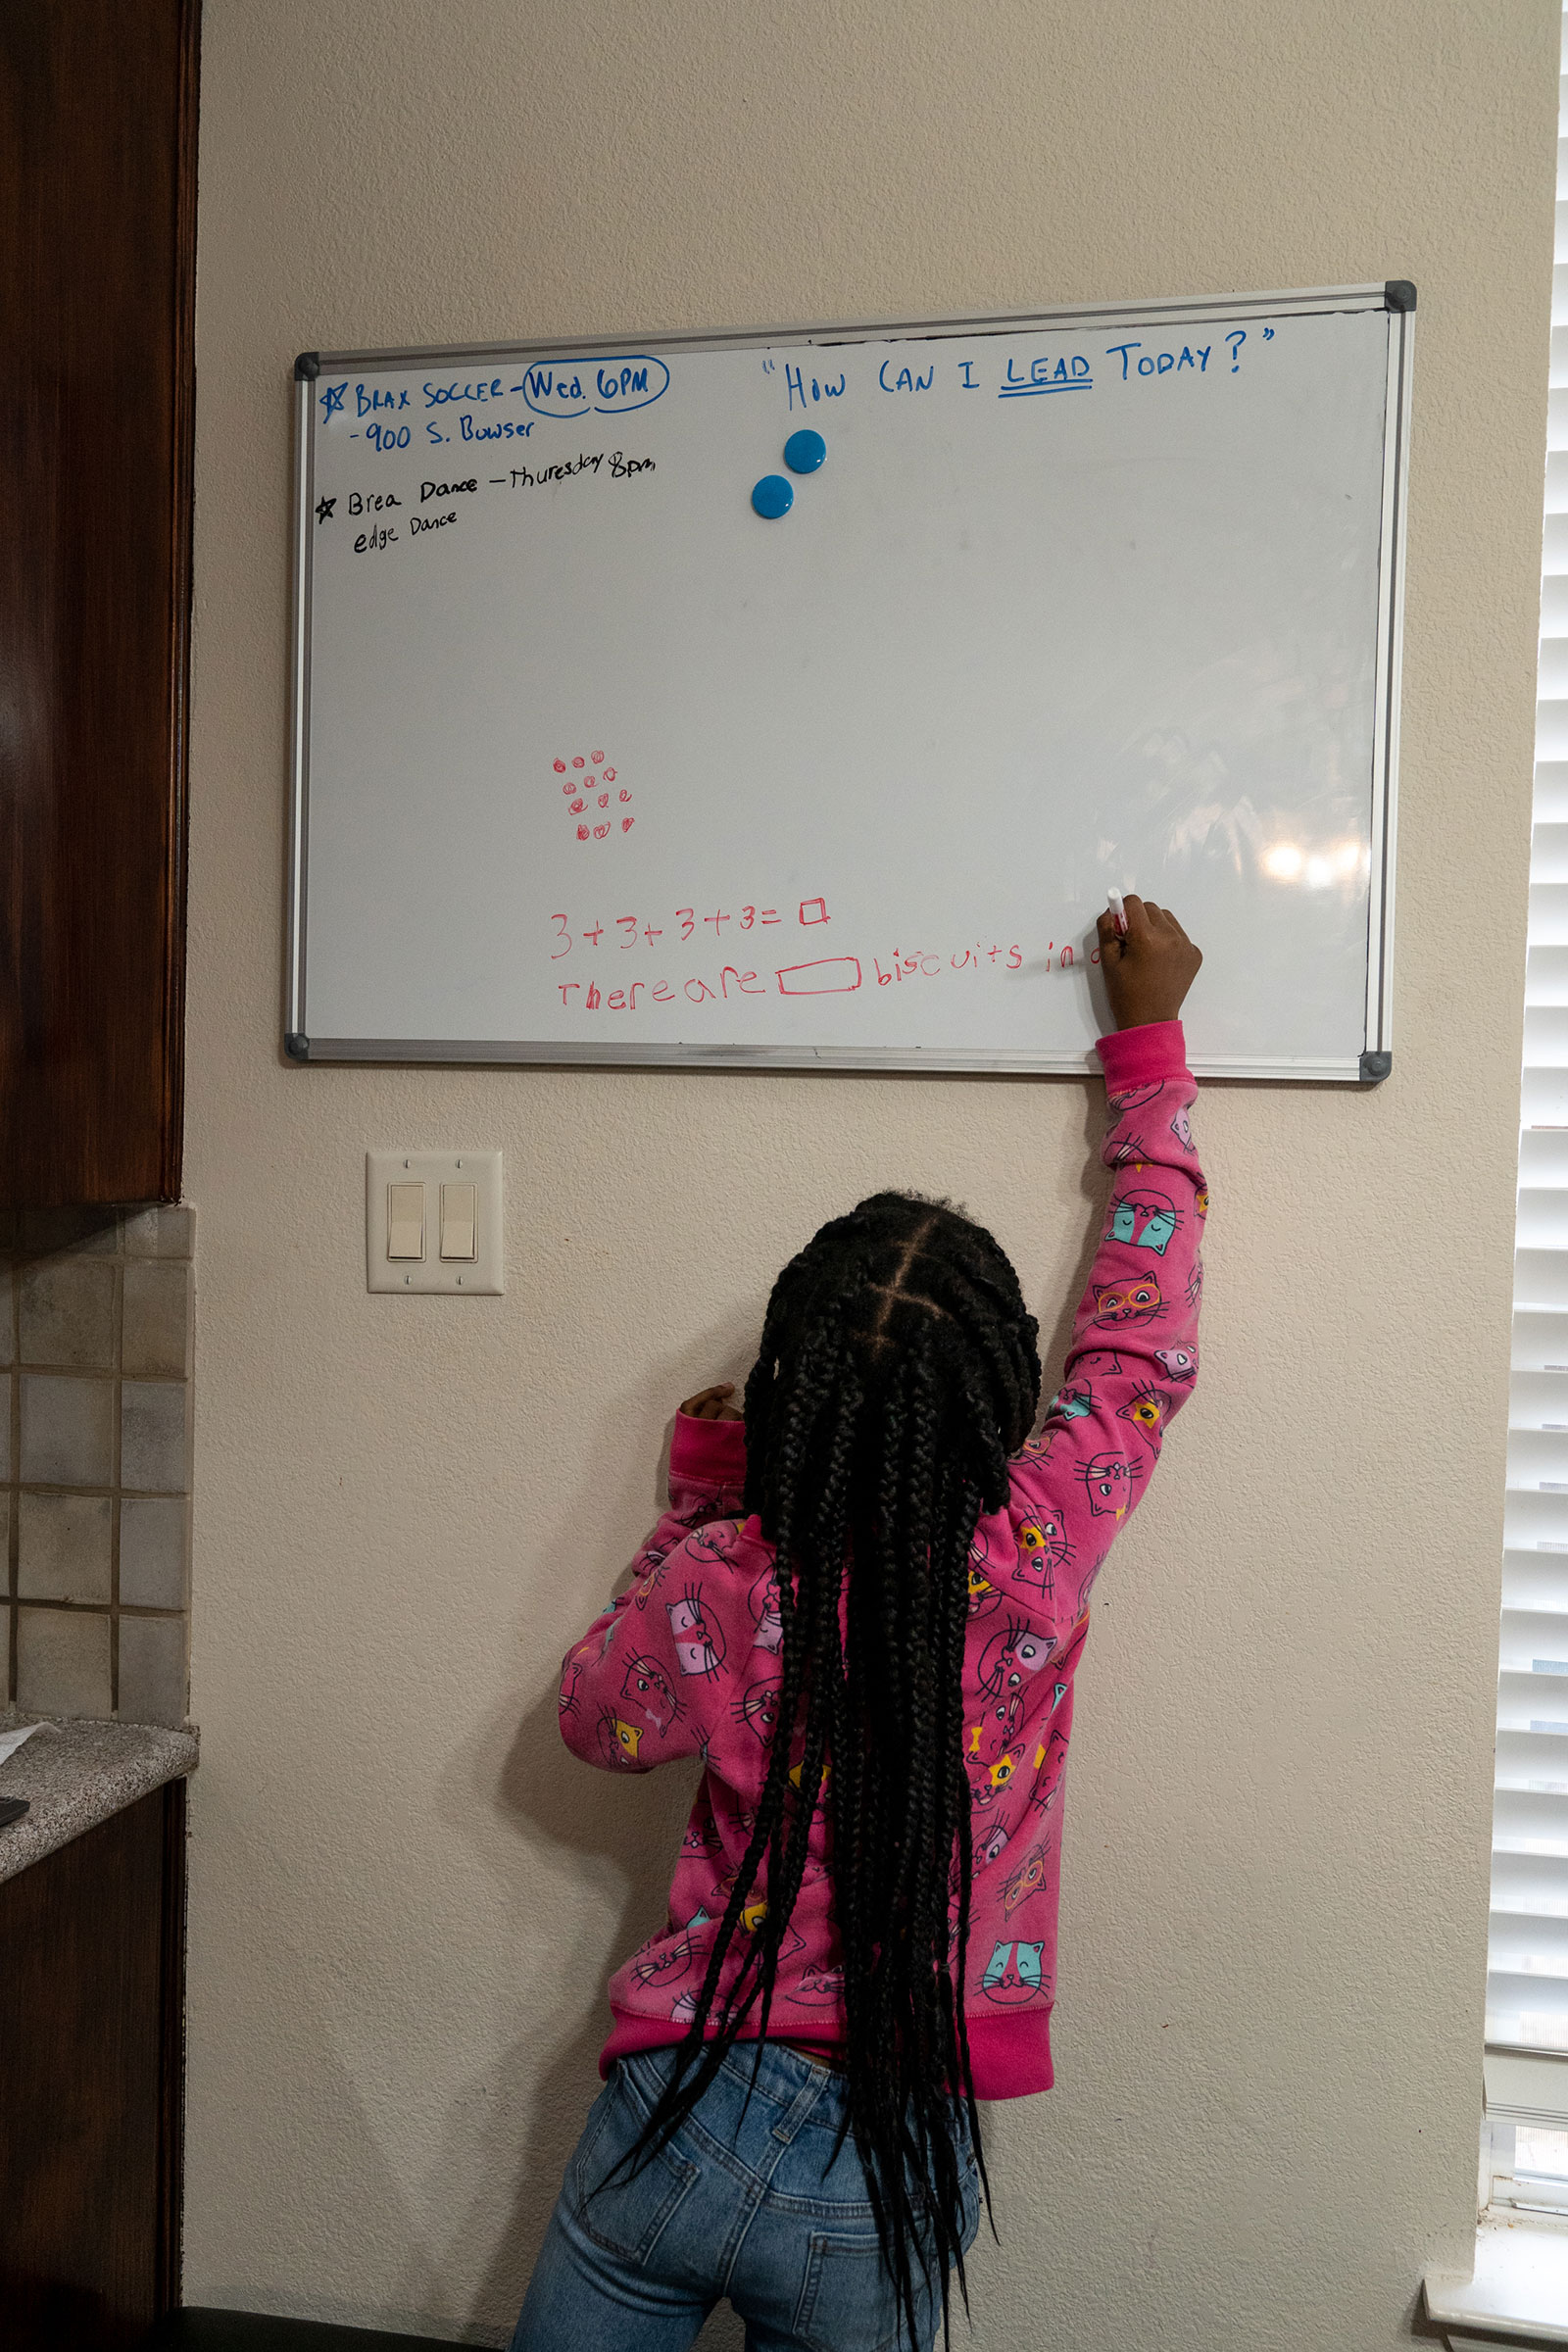 RICHARDSON, TEXAS - February 23, 2022: Bellamy, 8, works out a math problem on a whiteboard in the family's kitchen. Ilana Panich-Linsman for TIME